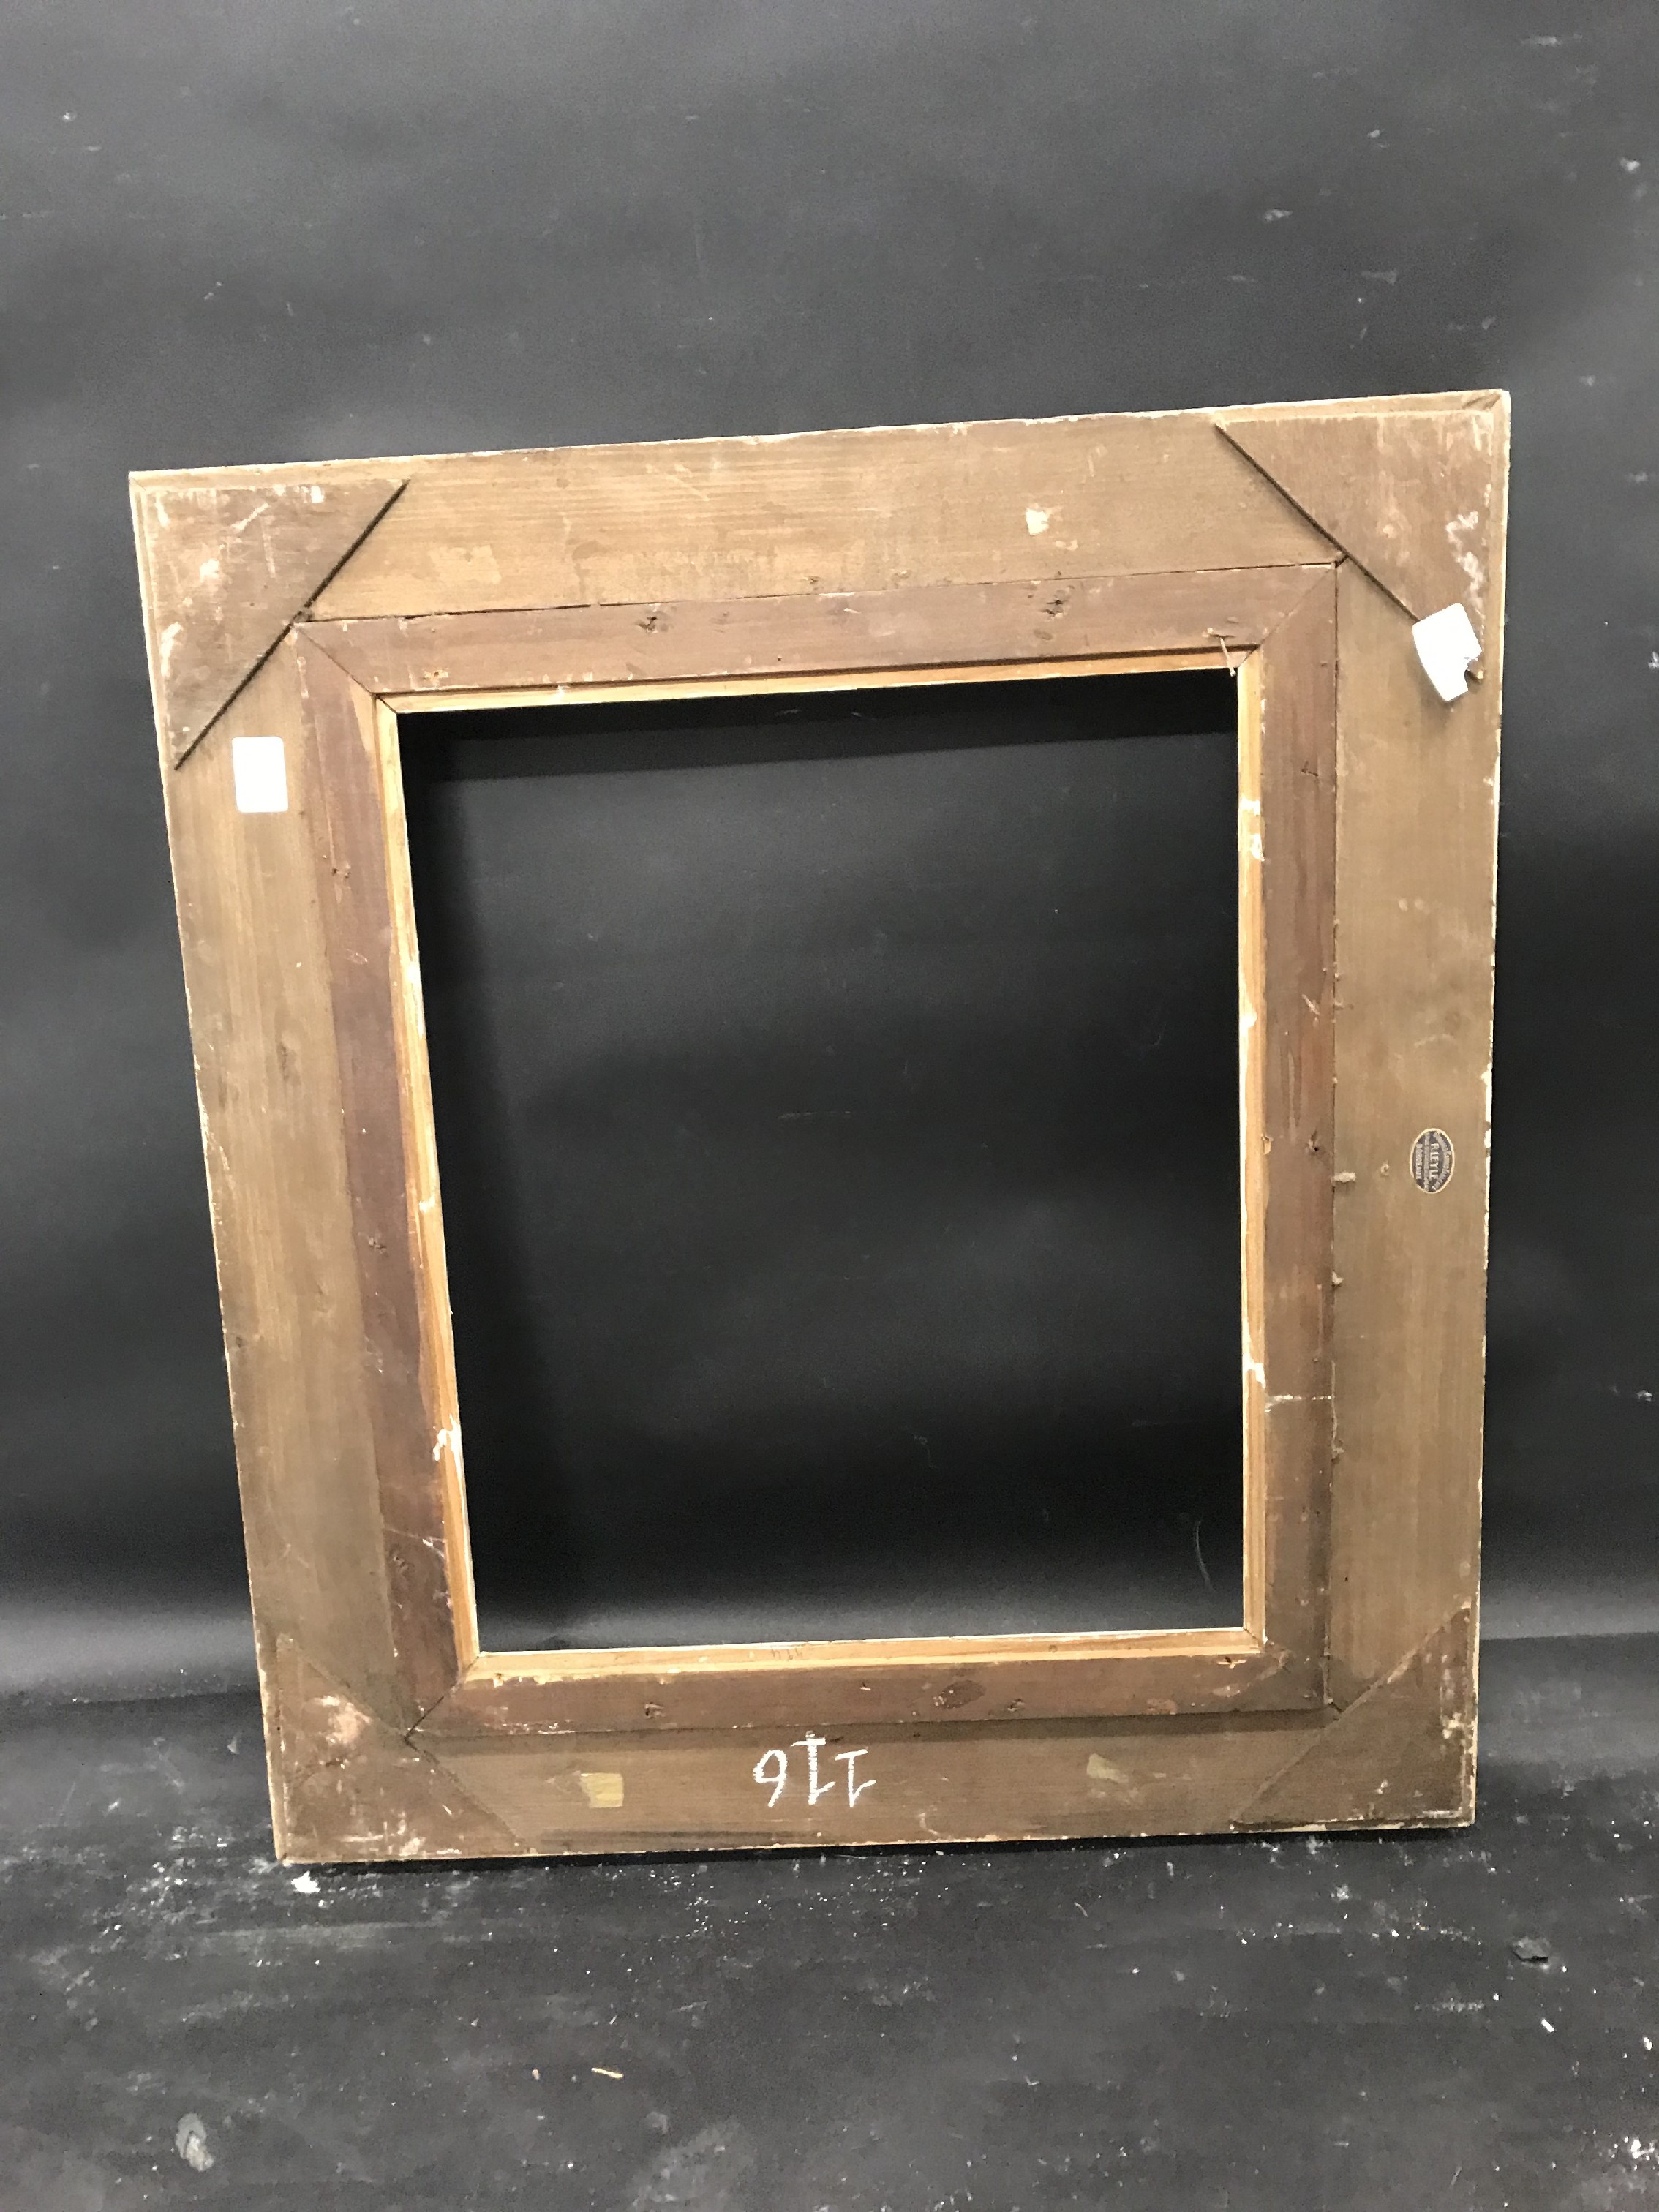 20th Century English School. A Carved Wood Painted Frame, 16" x 15" (rebate). - Image 3 of 3